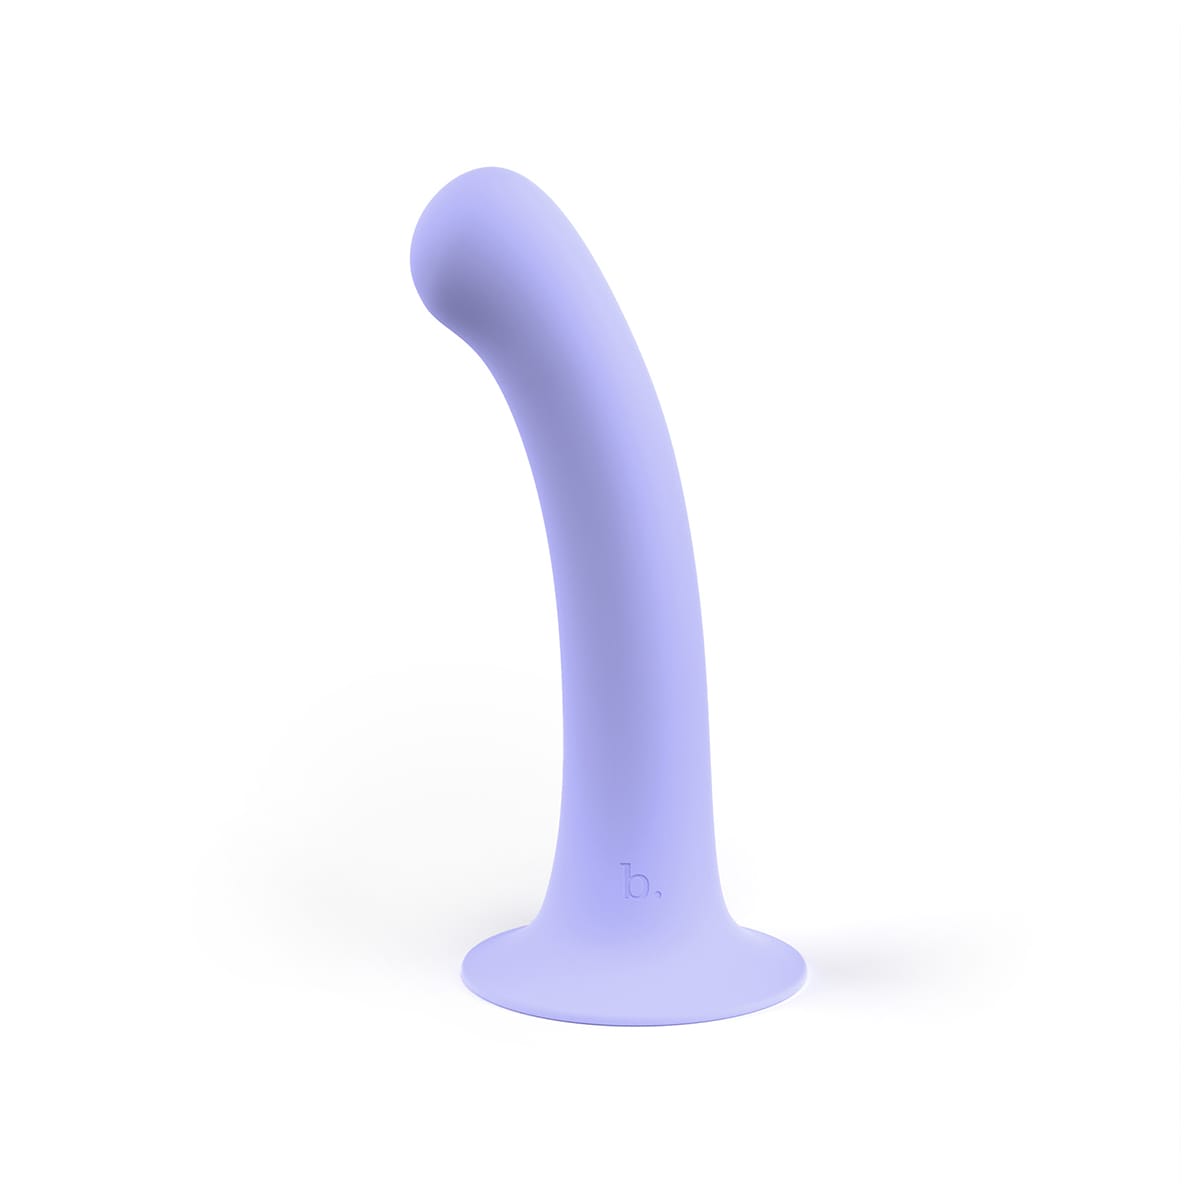 Buy Biird Surii 6 In. Silicone Dildo  long and  thick dildo made by Biird.